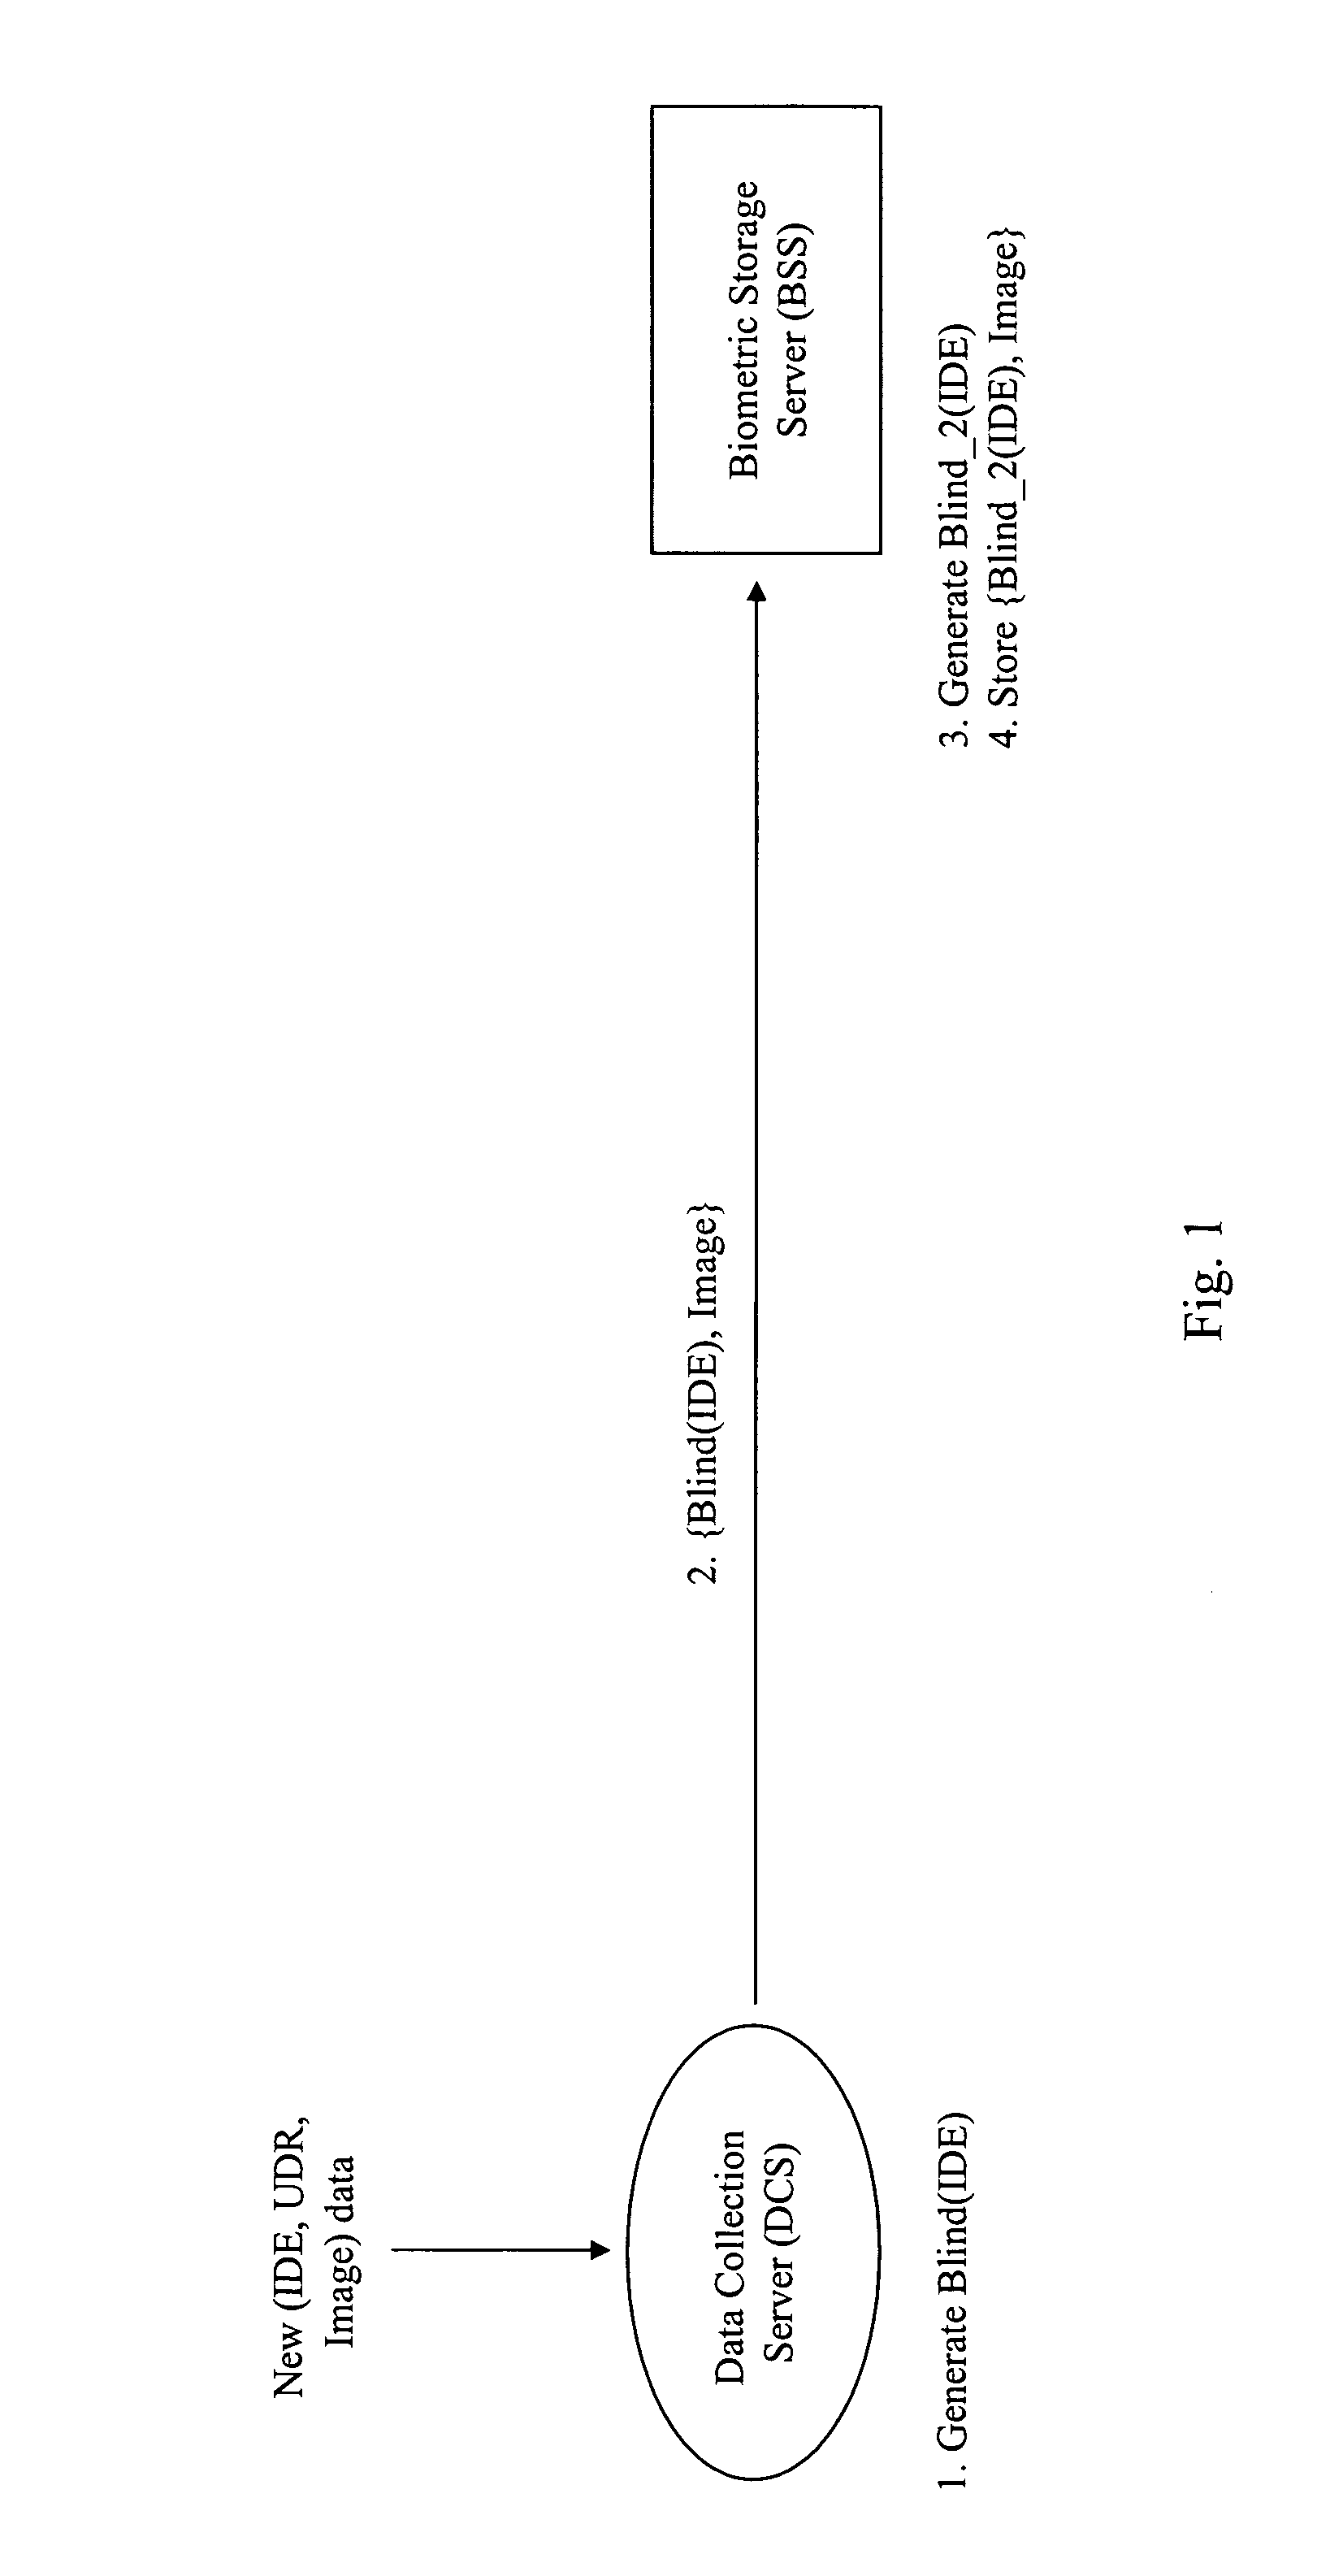 System and method for protecting the privacy and security of stored biometric data